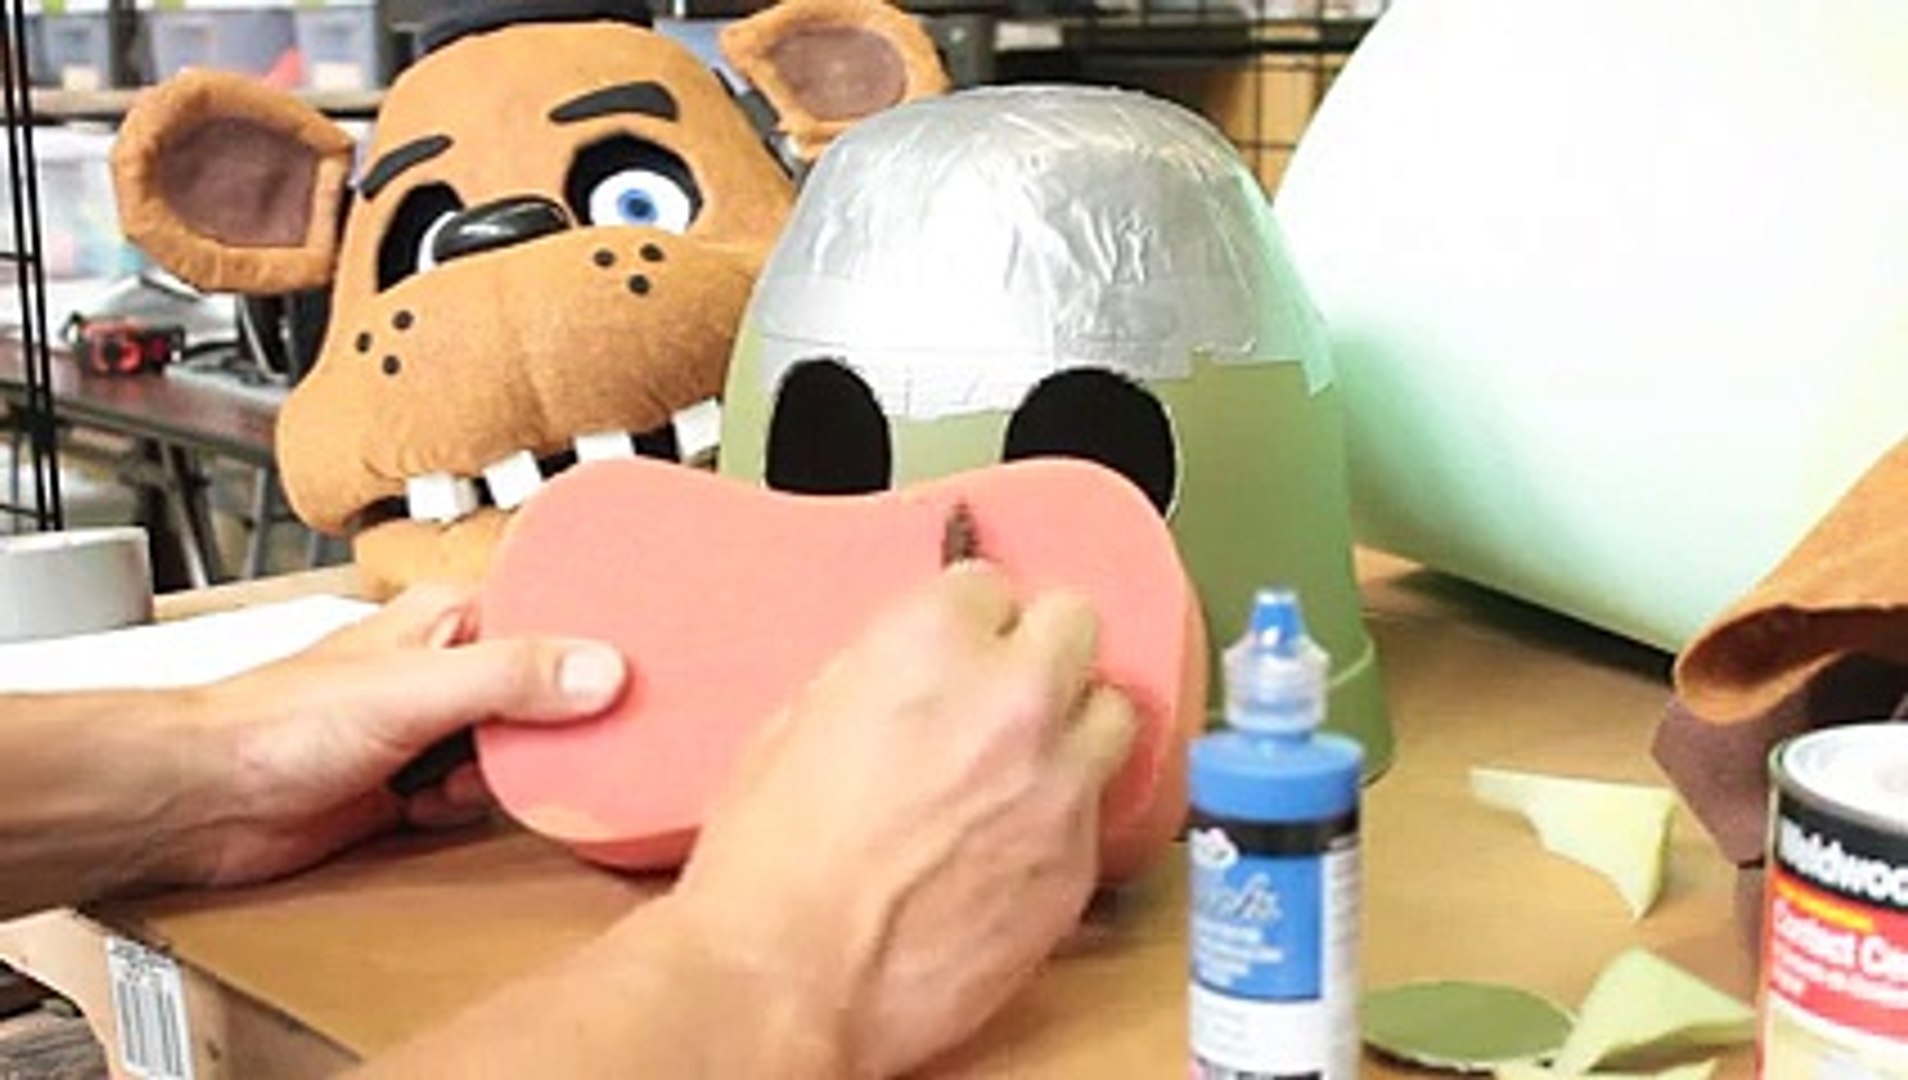 How To Make Your Own Freddy Fazbear Head - video Dailymotion